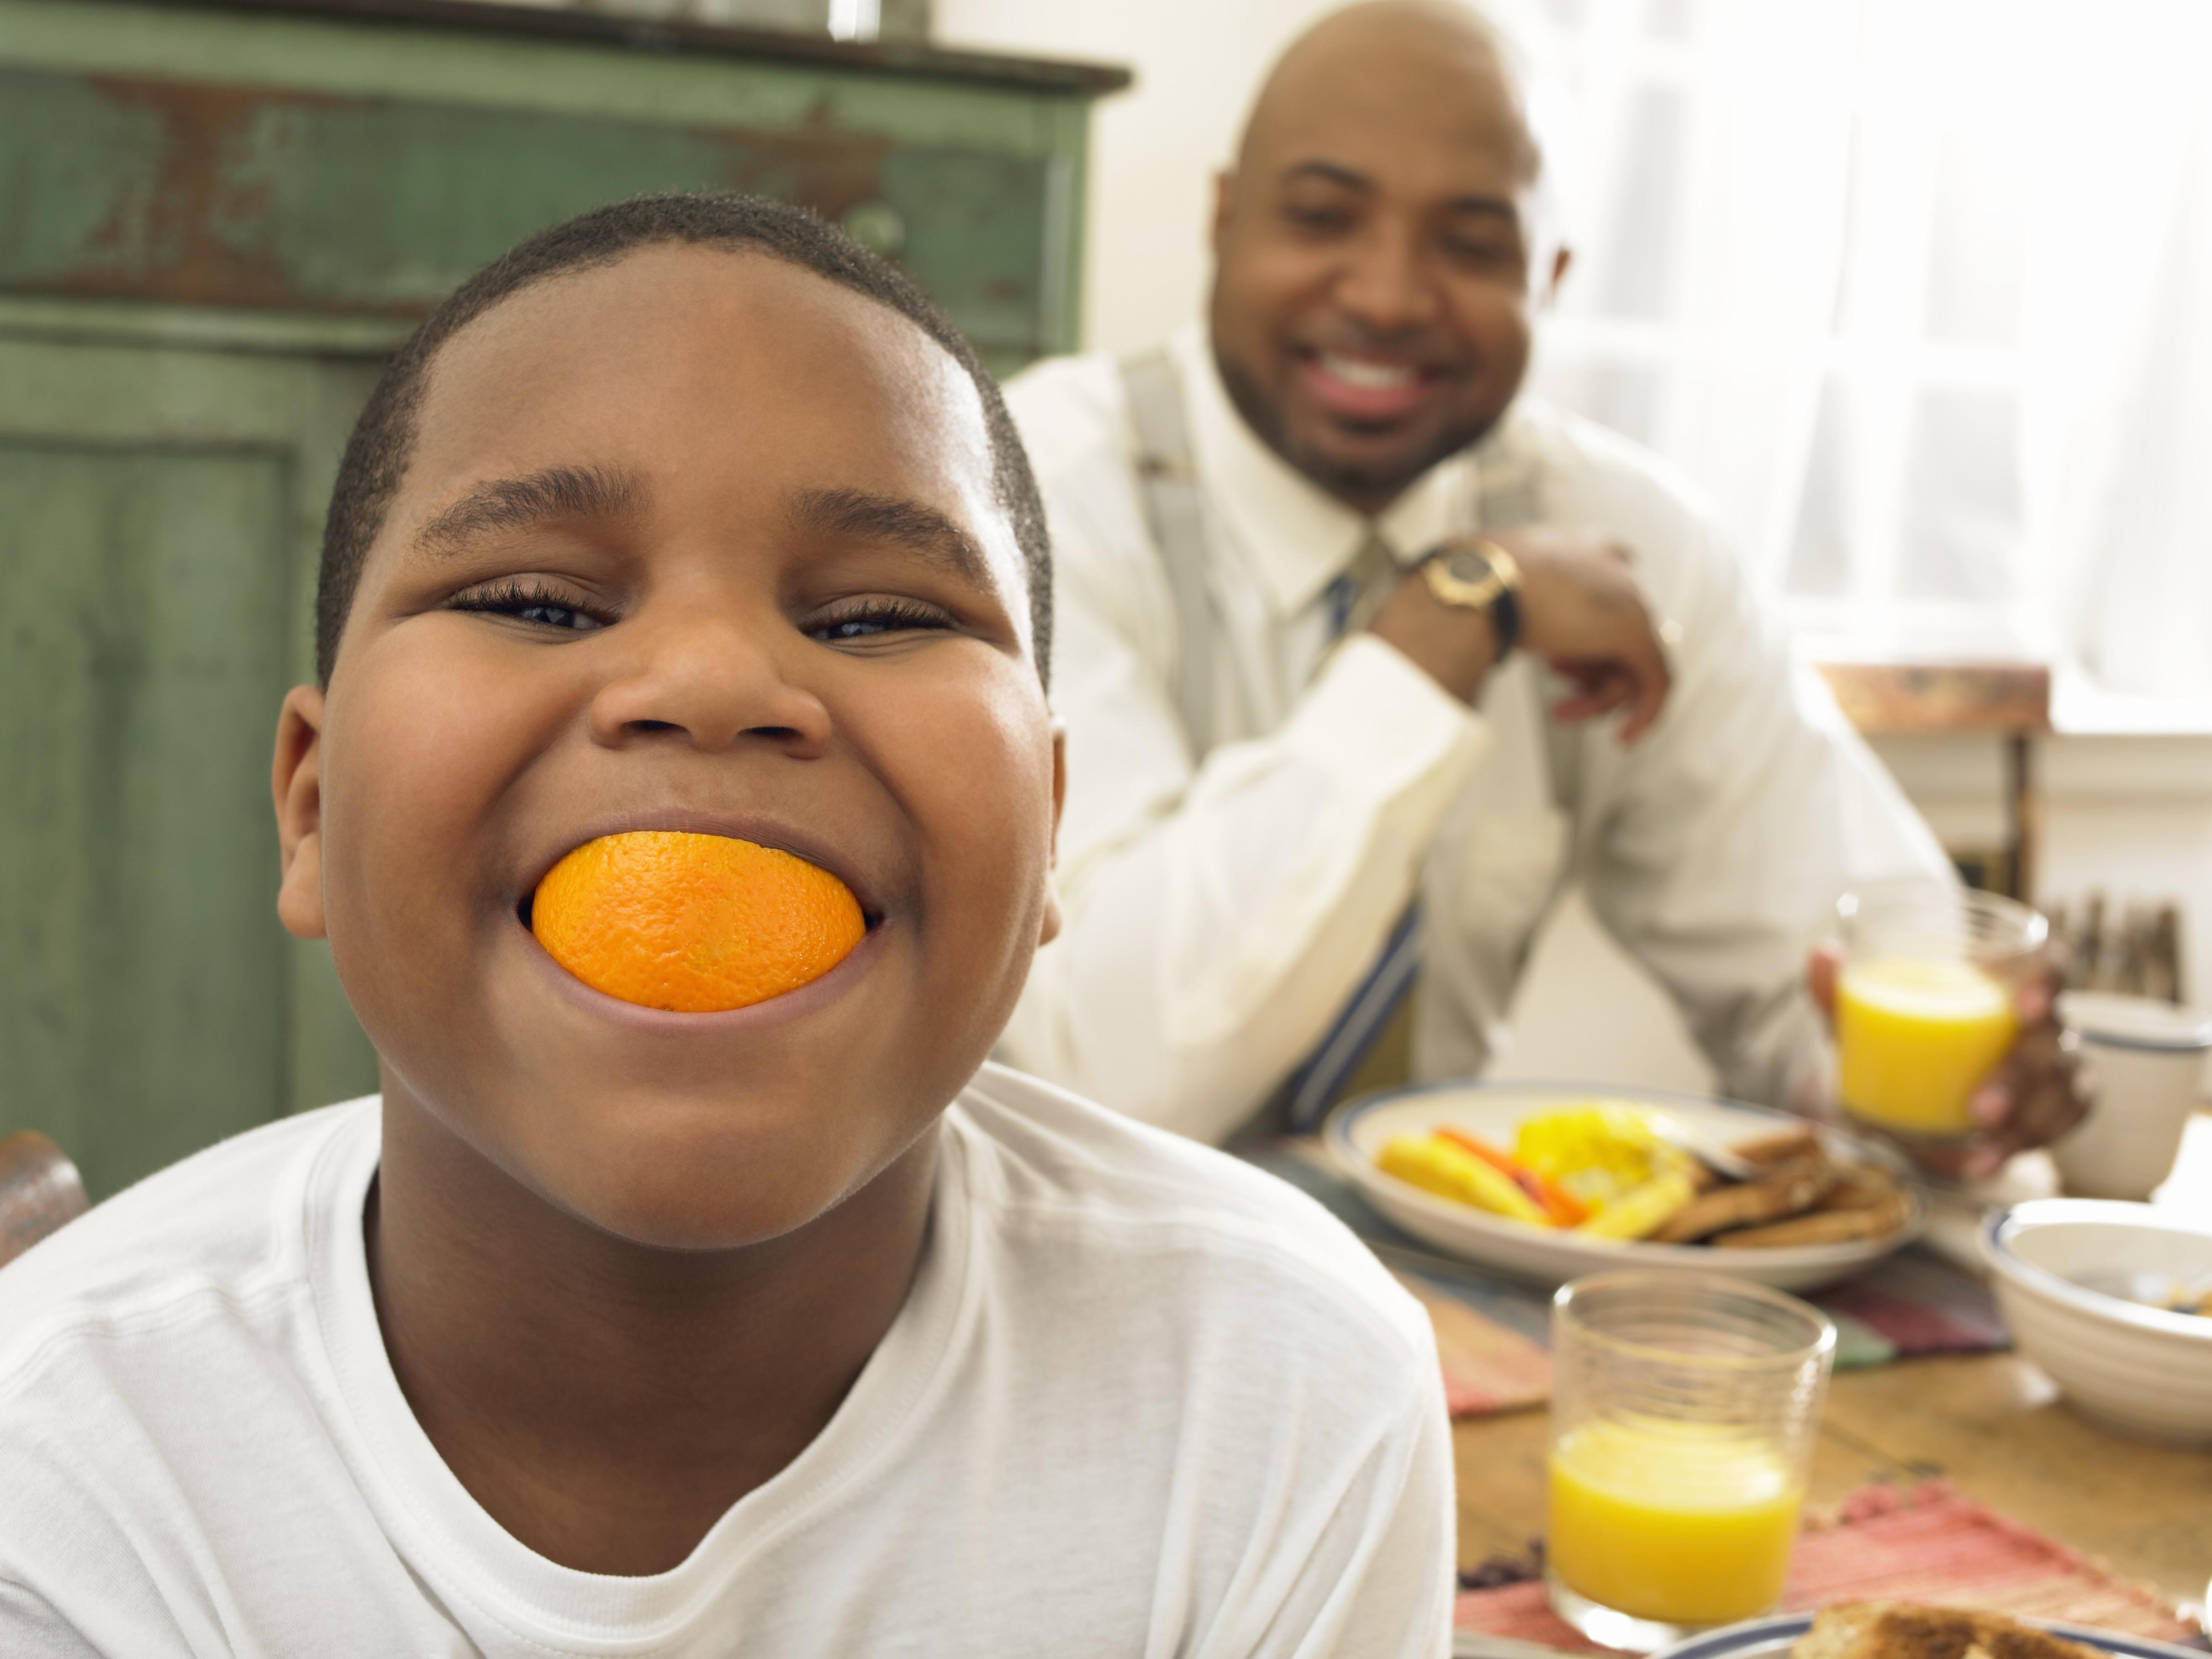 Boy With an Orange in His Mouth at Breakfast and His Father in the Background